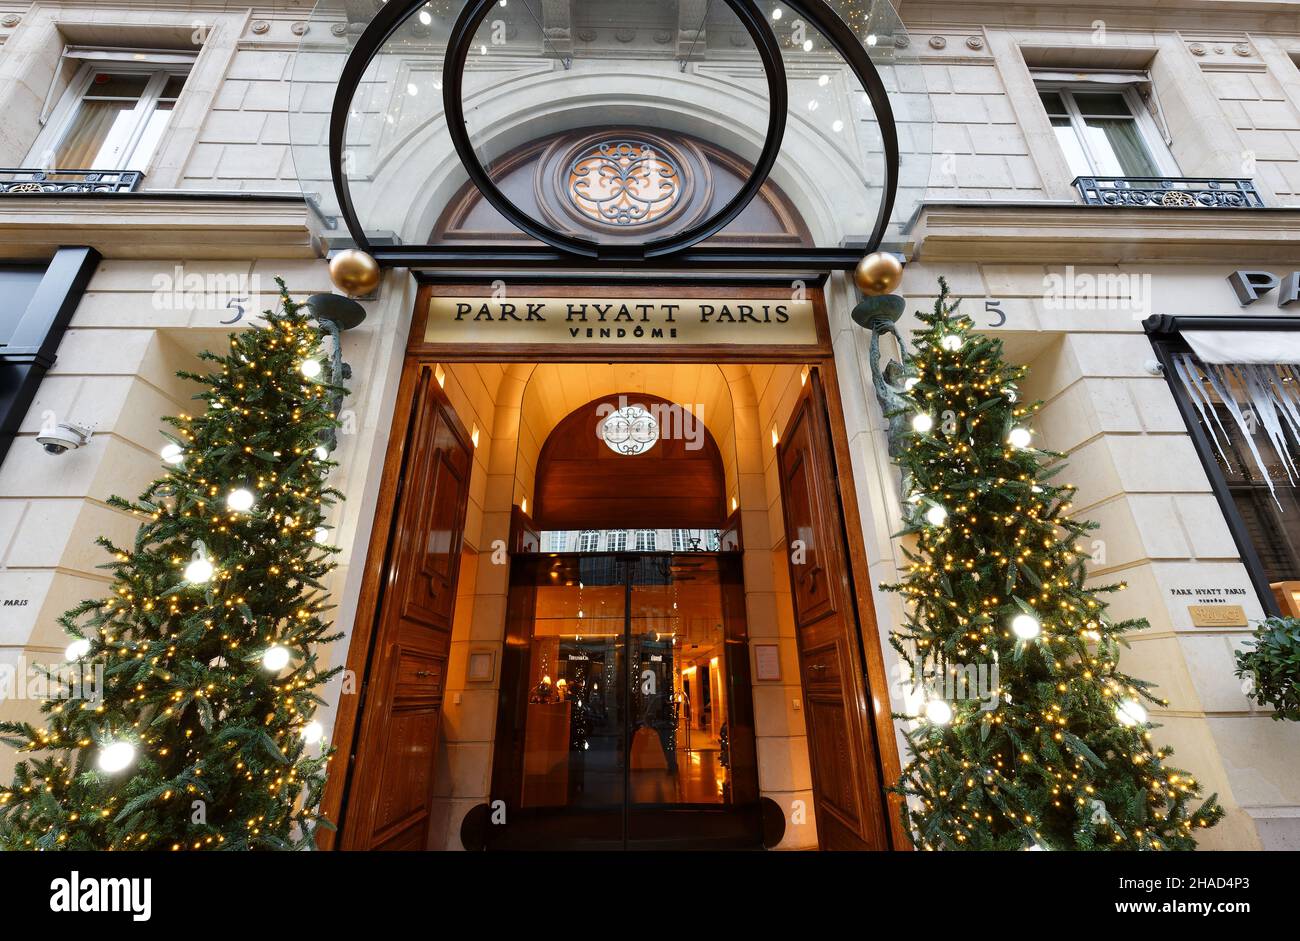 Park Hyatt Paris-Vendome is luxury hotel located in the heart of Paris , a stone's throw from the legendary Place Vendome. Stock Photo